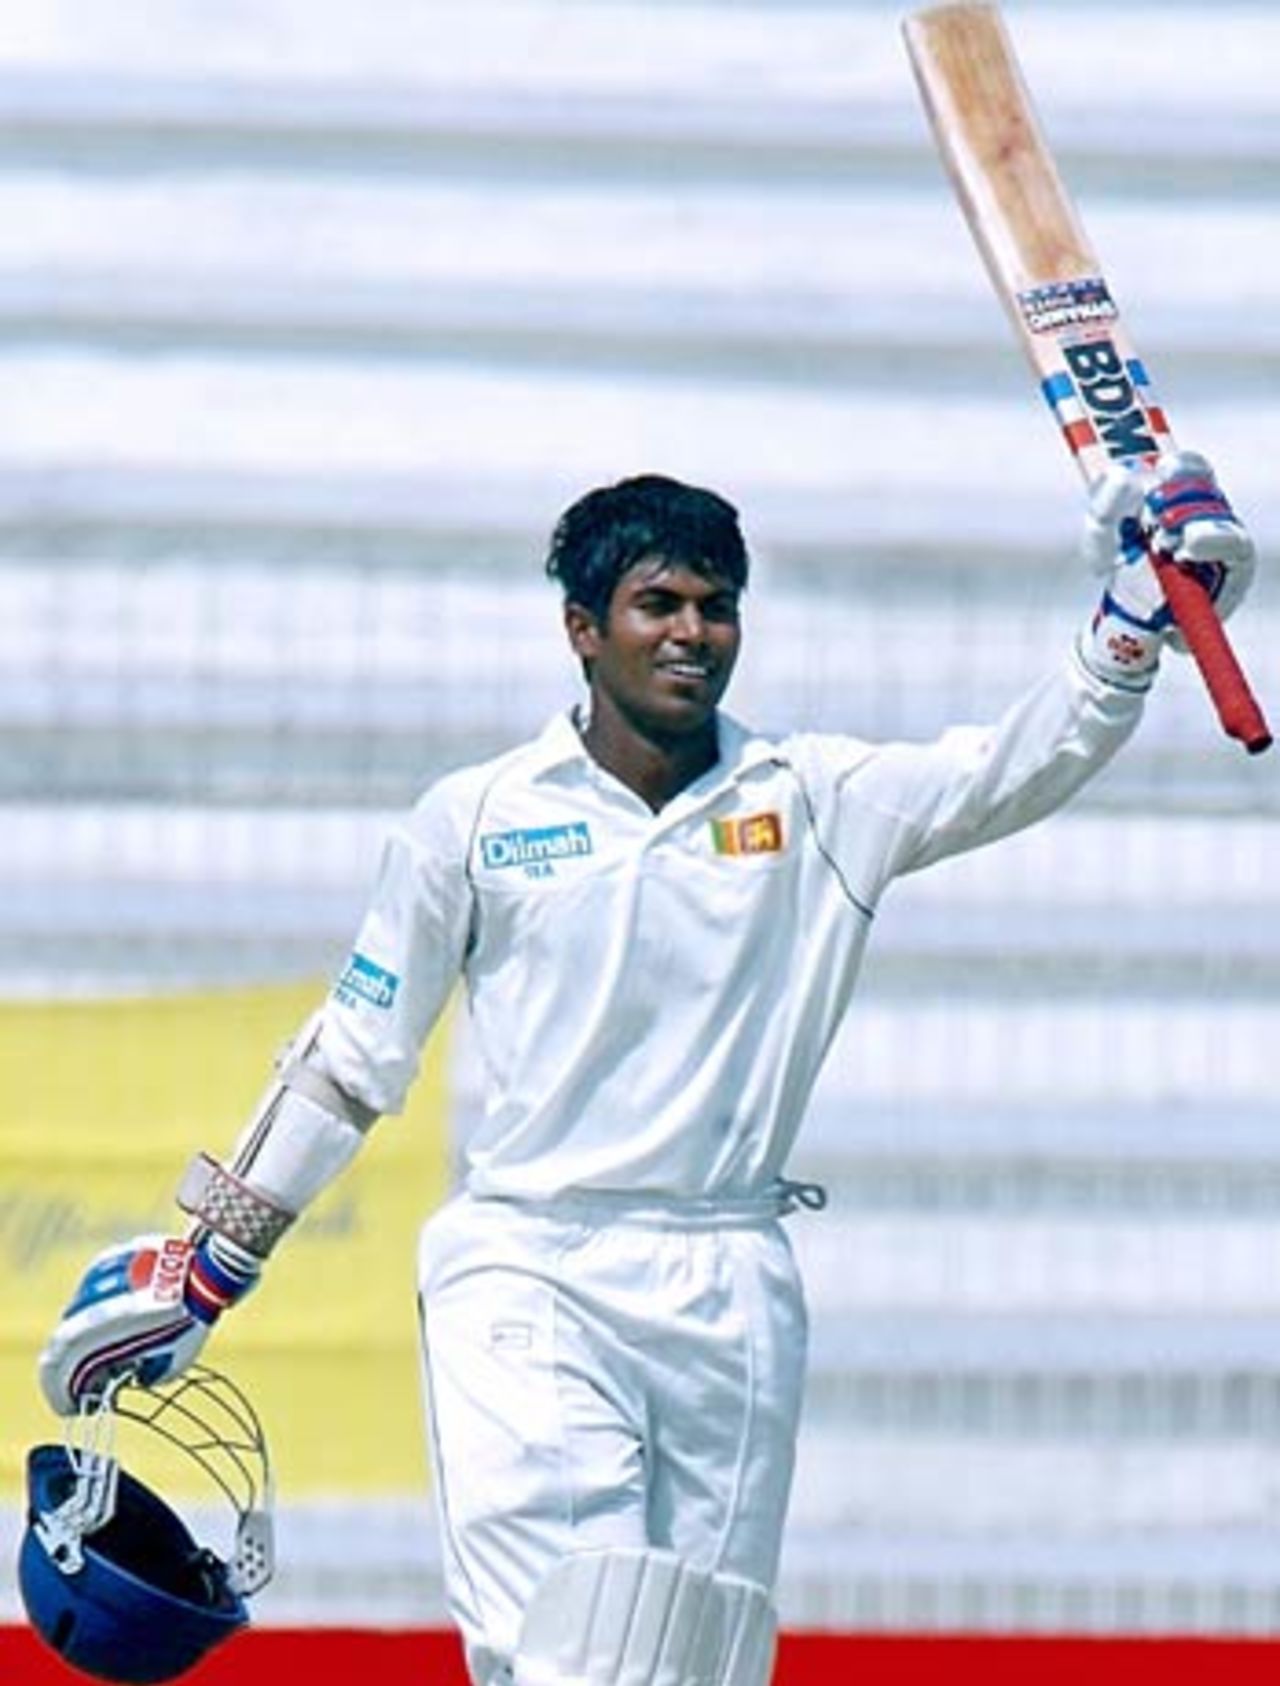 Upul Tharanga savours the moment after reaching his maiden ton, Bangladesh v Sri Lanka, 2nd Test, Bogra, 2nd day, March 9, 2006